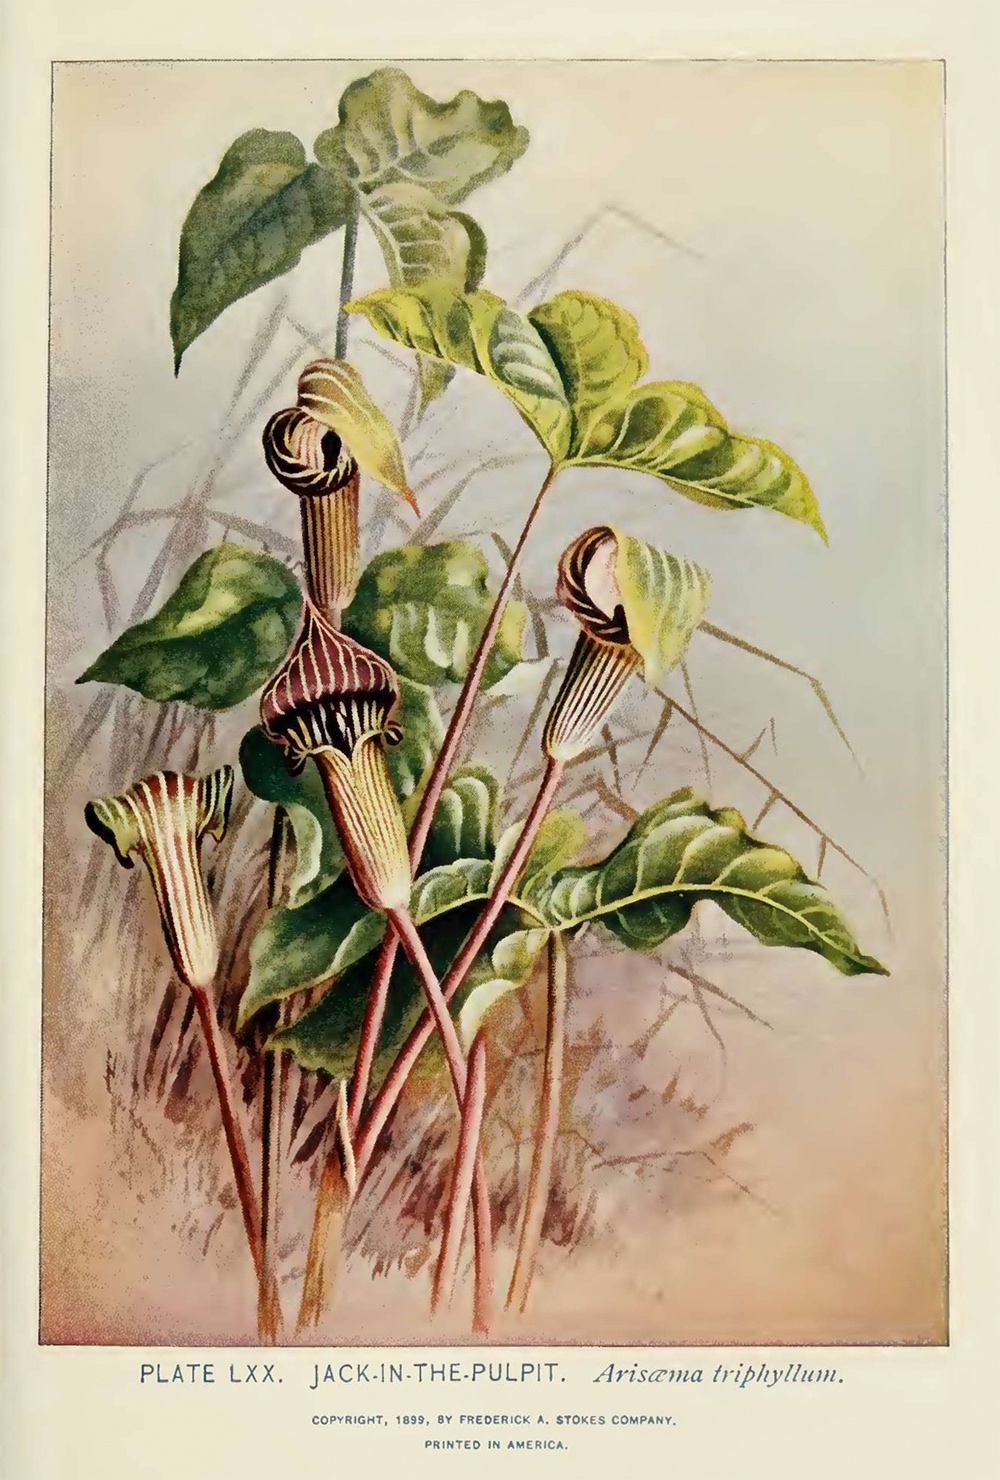 Jack-in-the-Pulpit illustration by Alice Lounsberry circa 1899.